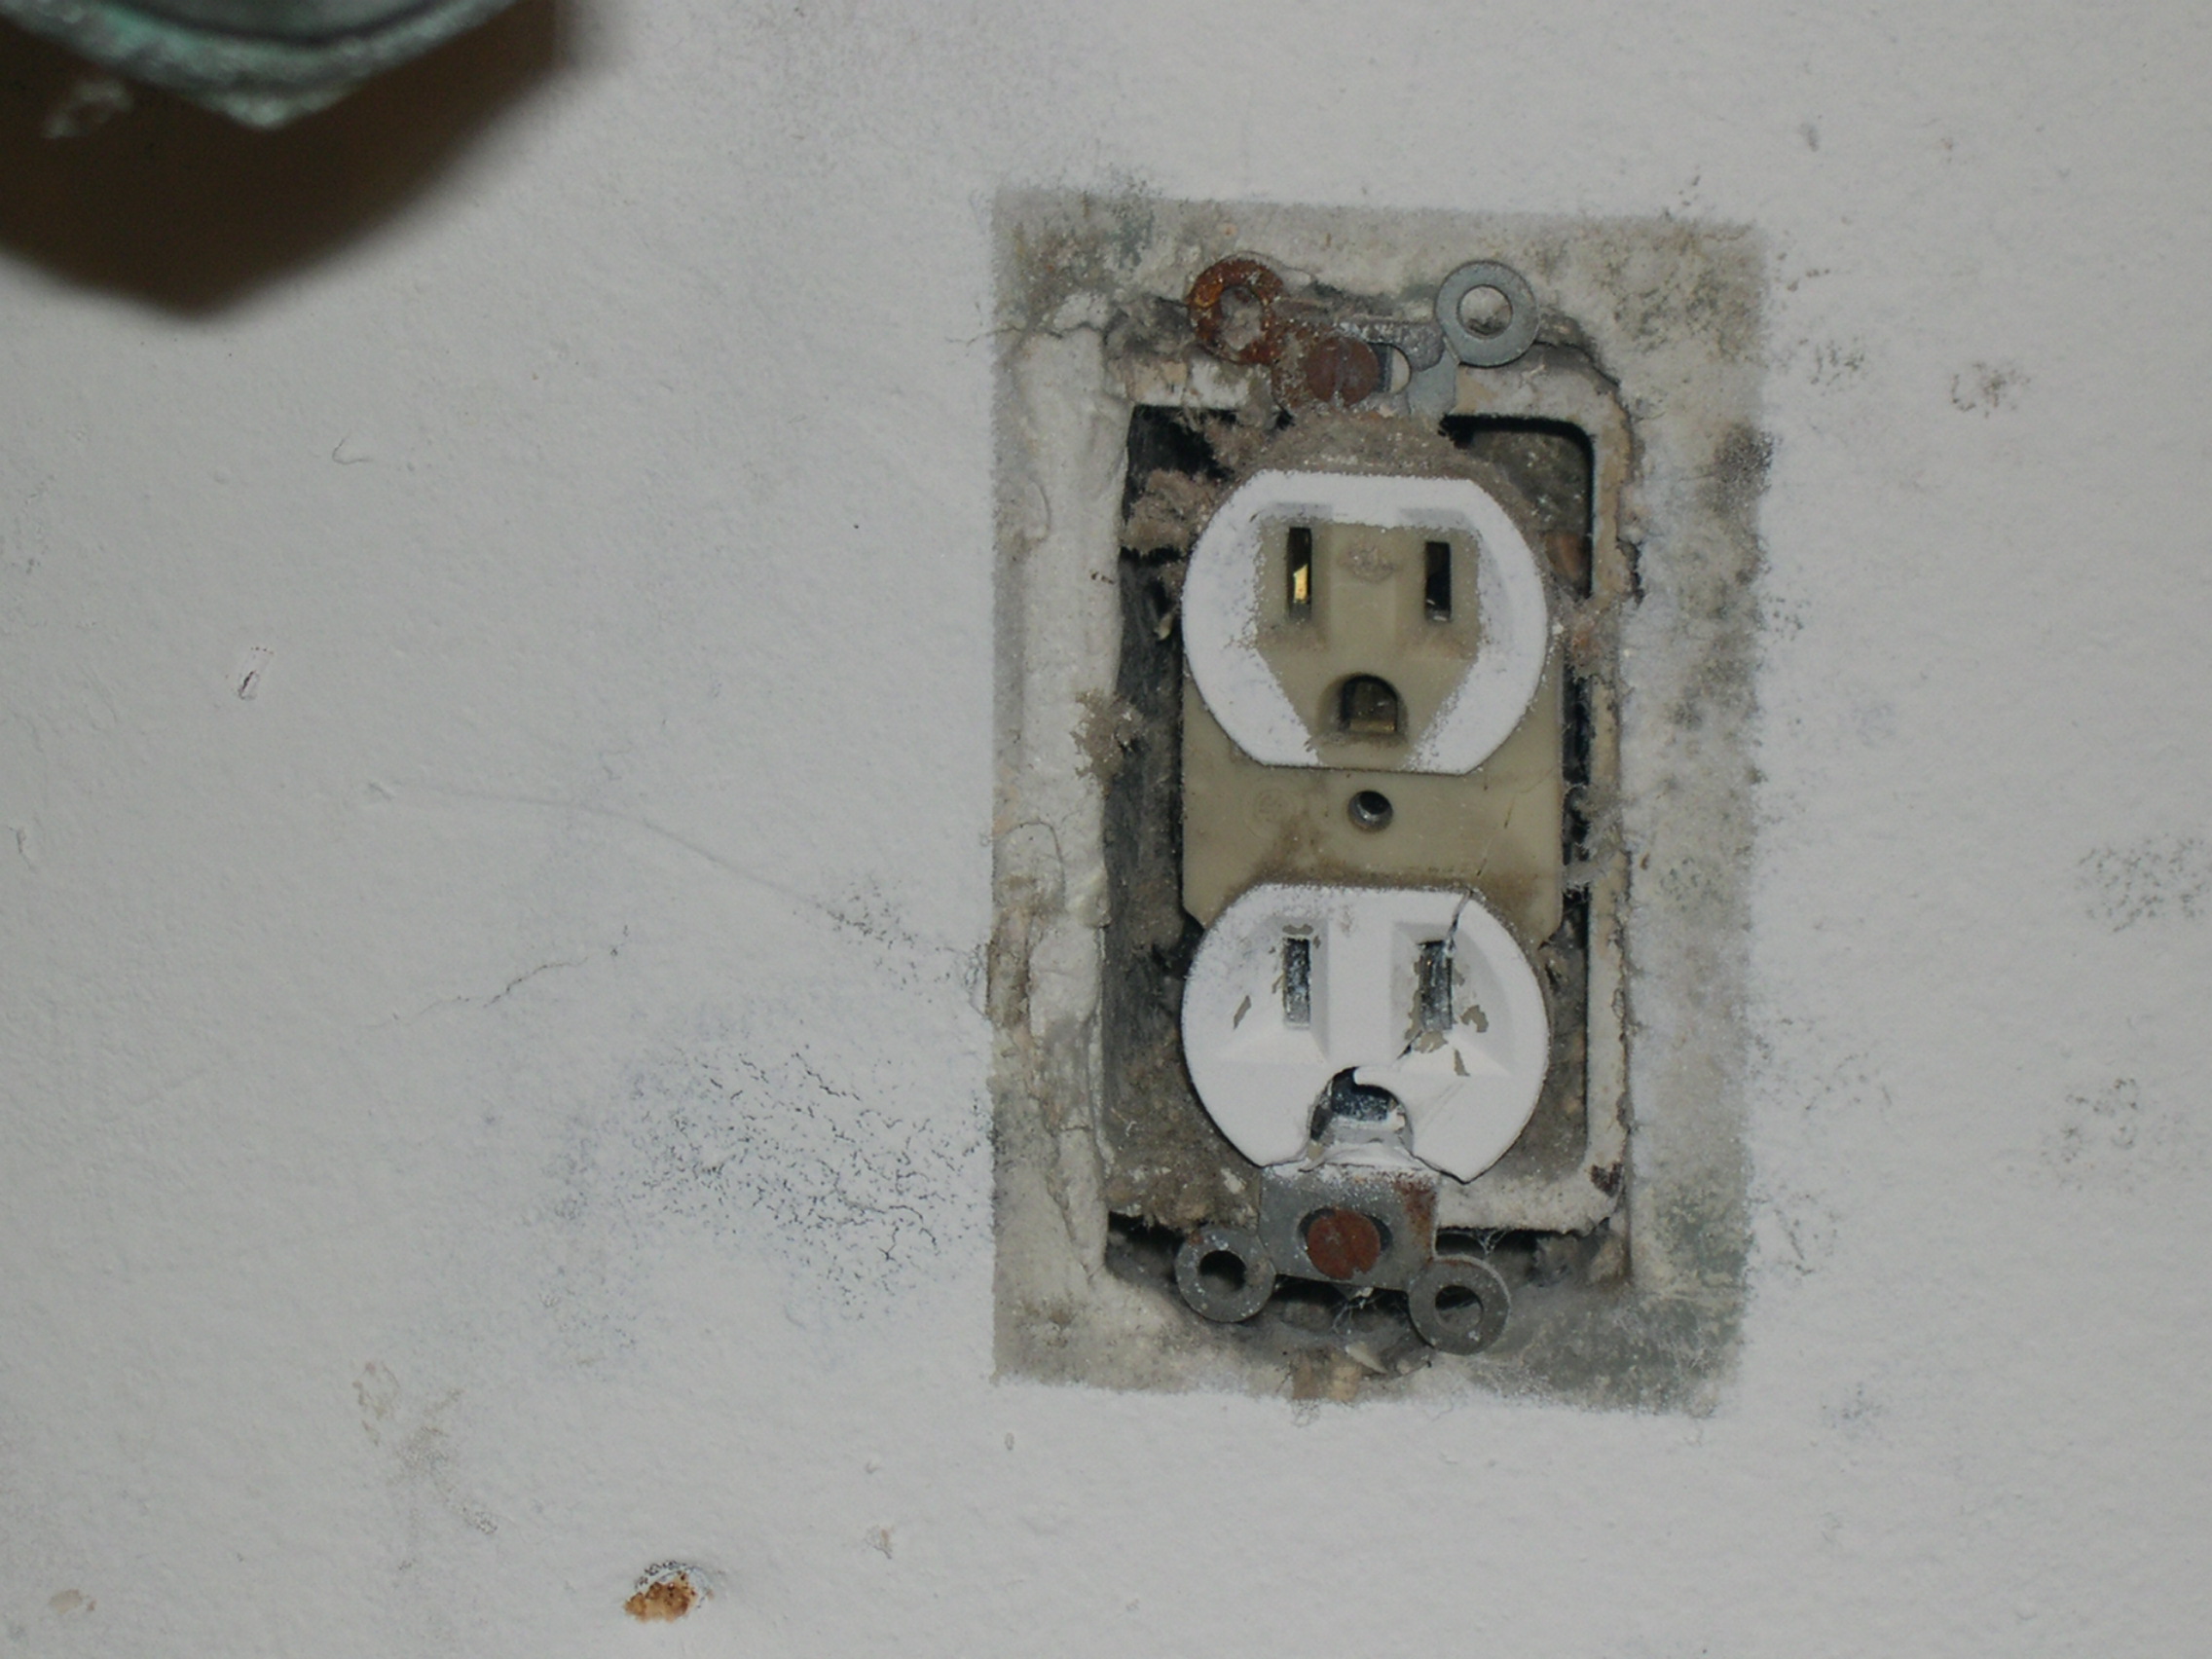 Molded electrical outlet that was painted around.